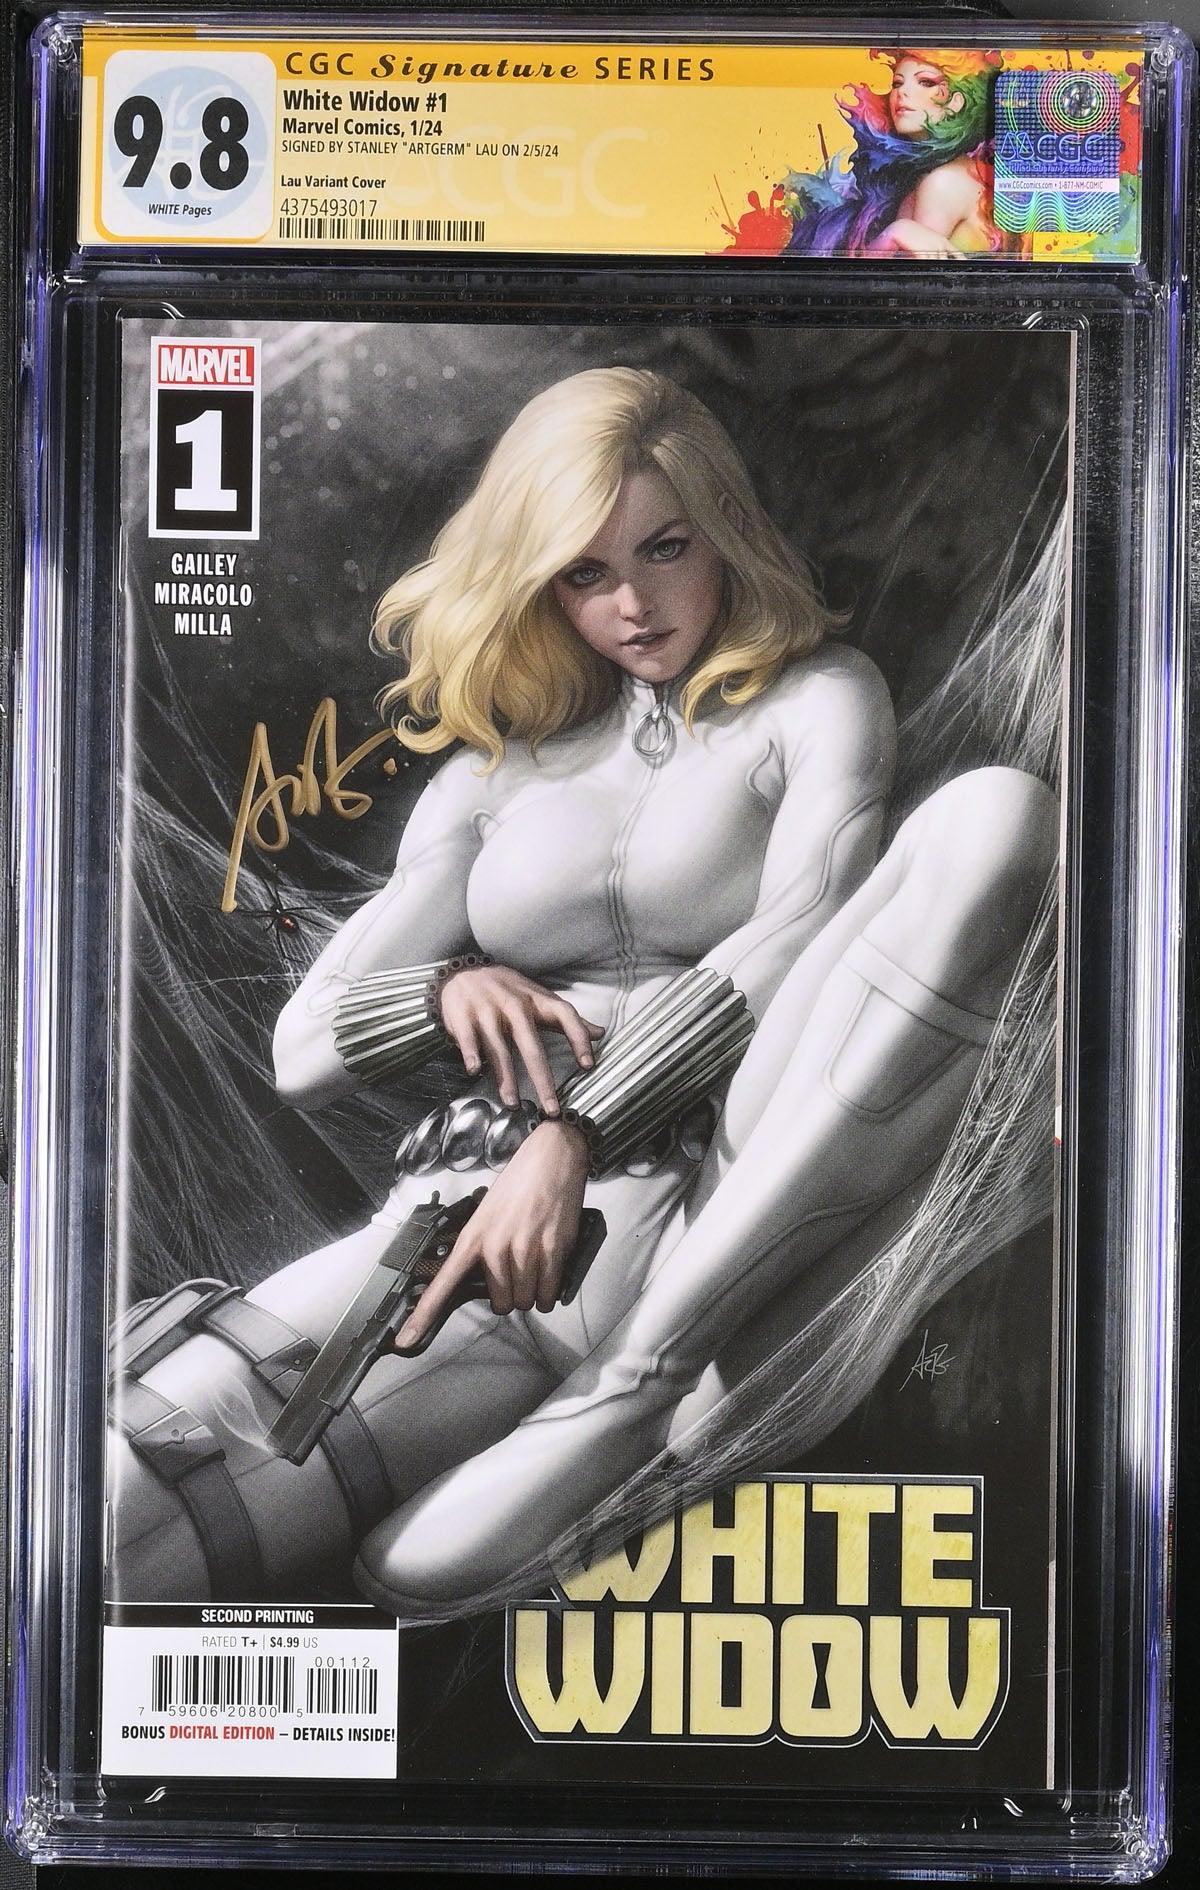 CGC WHITE WIDOW #1 LAU VARIANT (9.8) SIGNATURE SERIES - SIGNED BY STANLEY "ARTGERM"